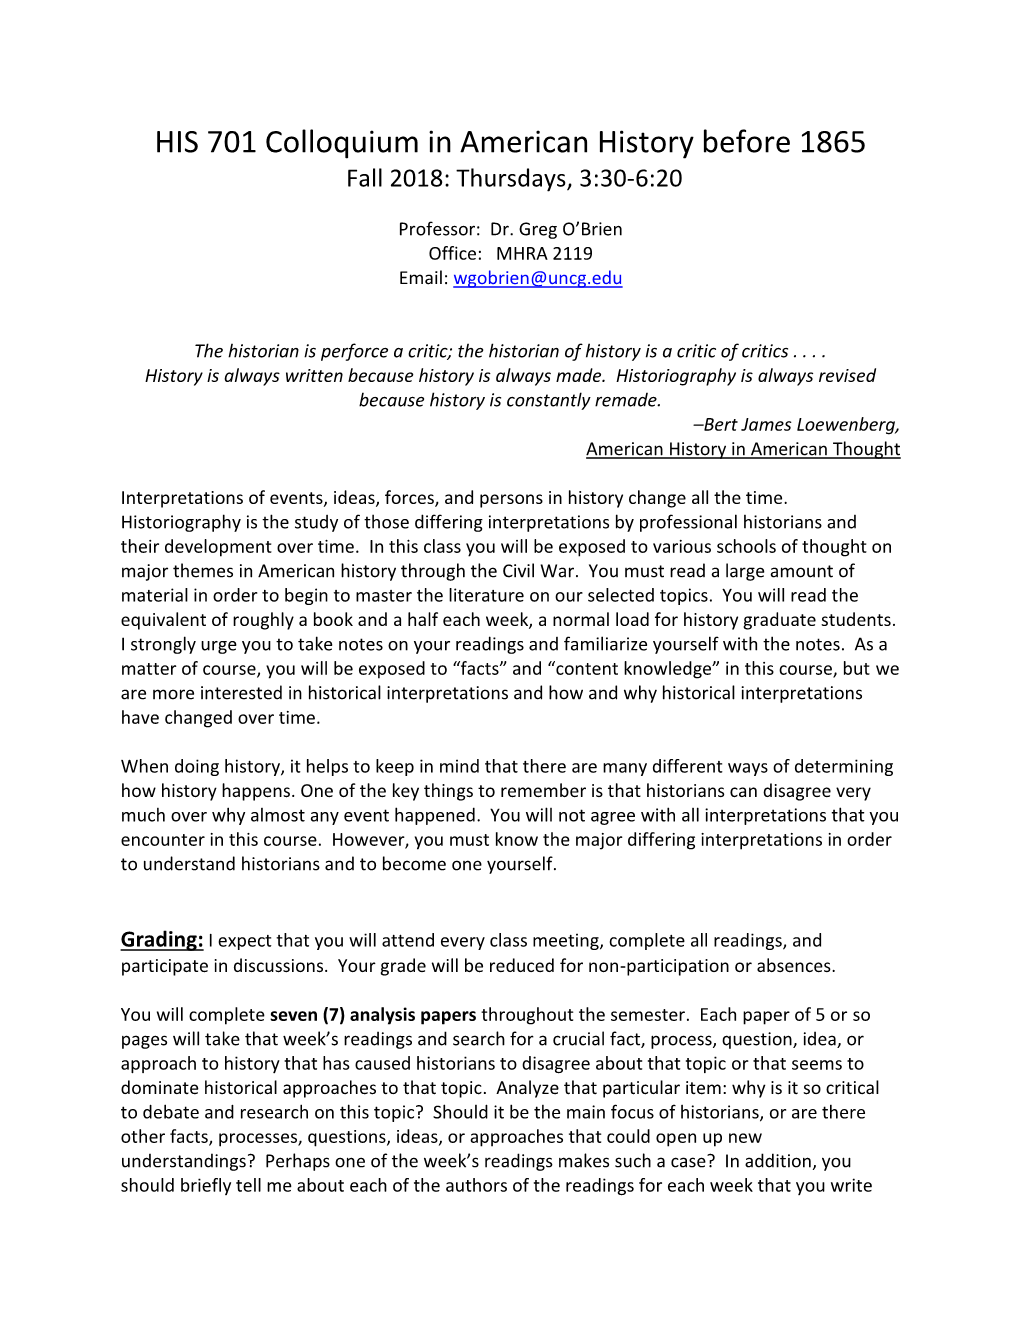 HIS 701 Colloquium in American History Before 1865 Fall 2018: Thursdays, 3:30-6:20